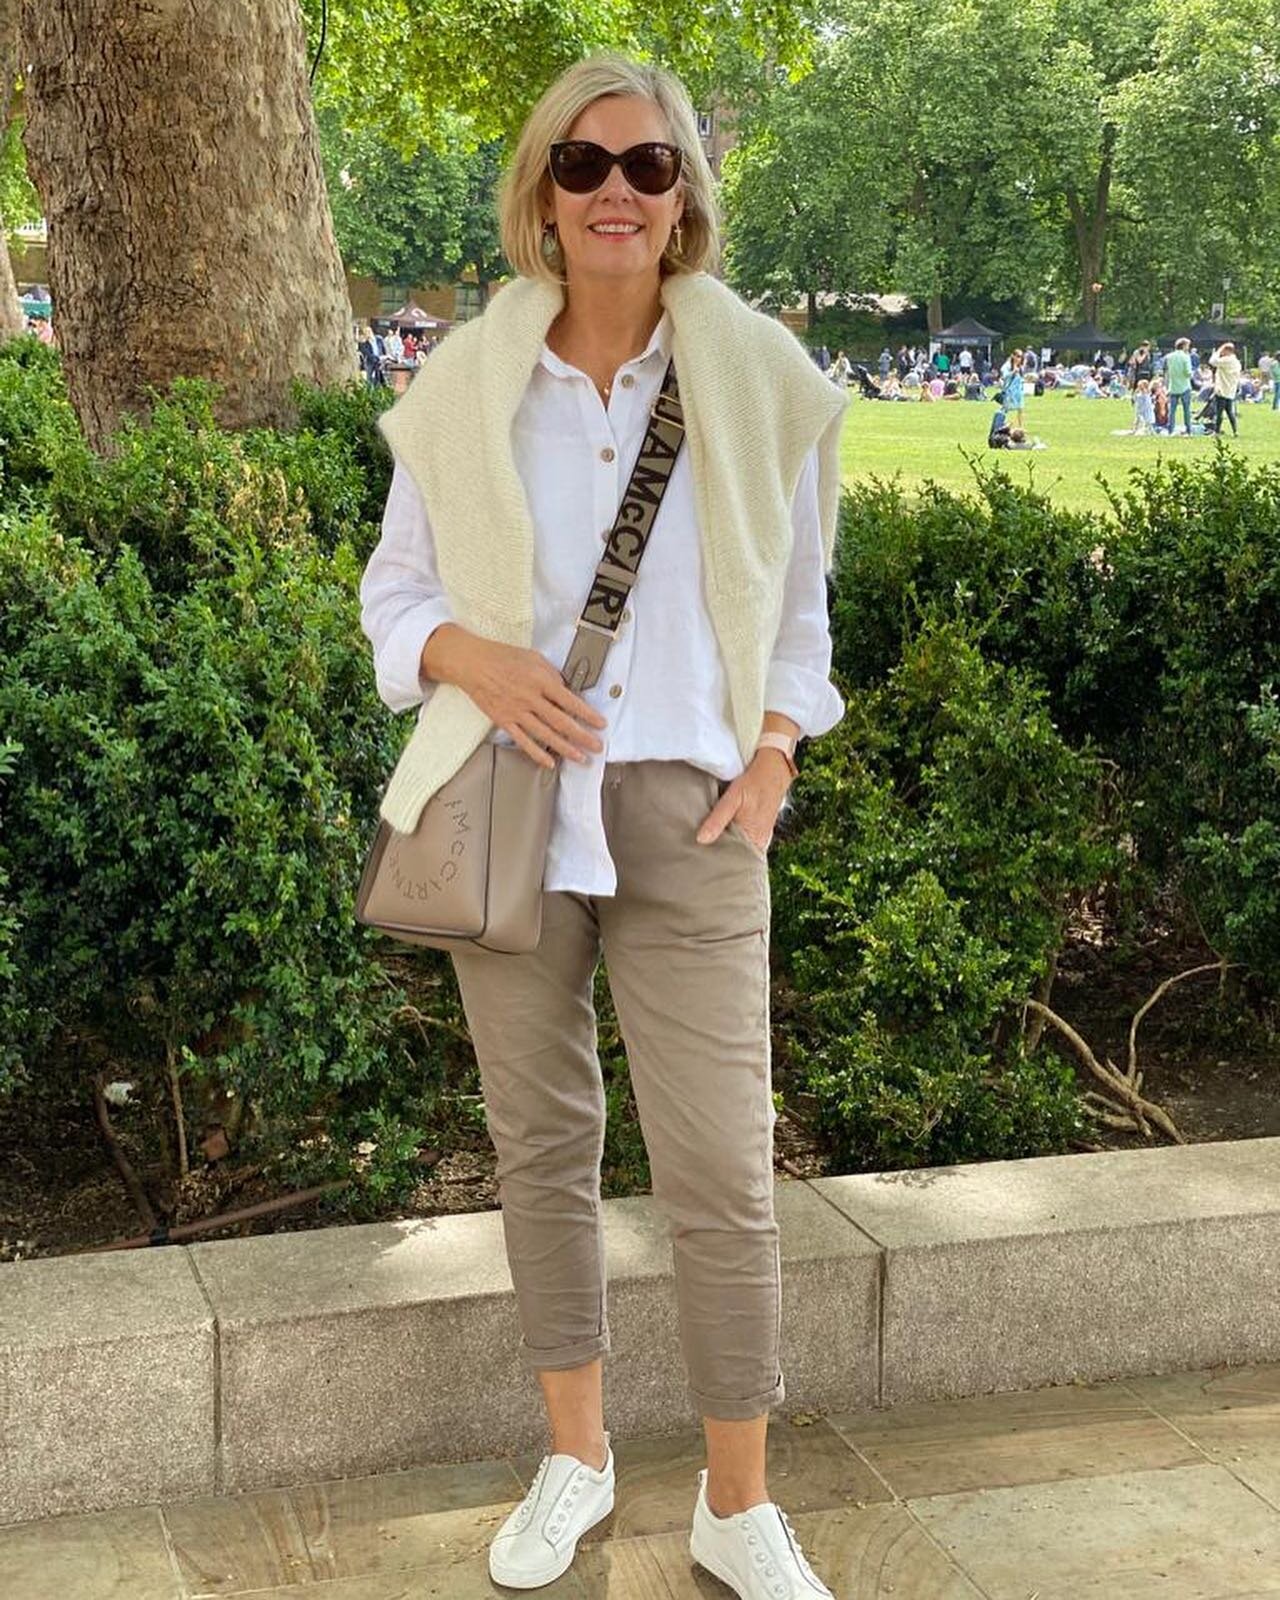 CASUAL FAVOURITES! 🤎🤍
 
These casual chic styles from @bypias are one of my favourites looks for easy going everyday wear, weekend wear or great to take when travelling.
The neutral colours go so well together and the leather sneaker and casual cro